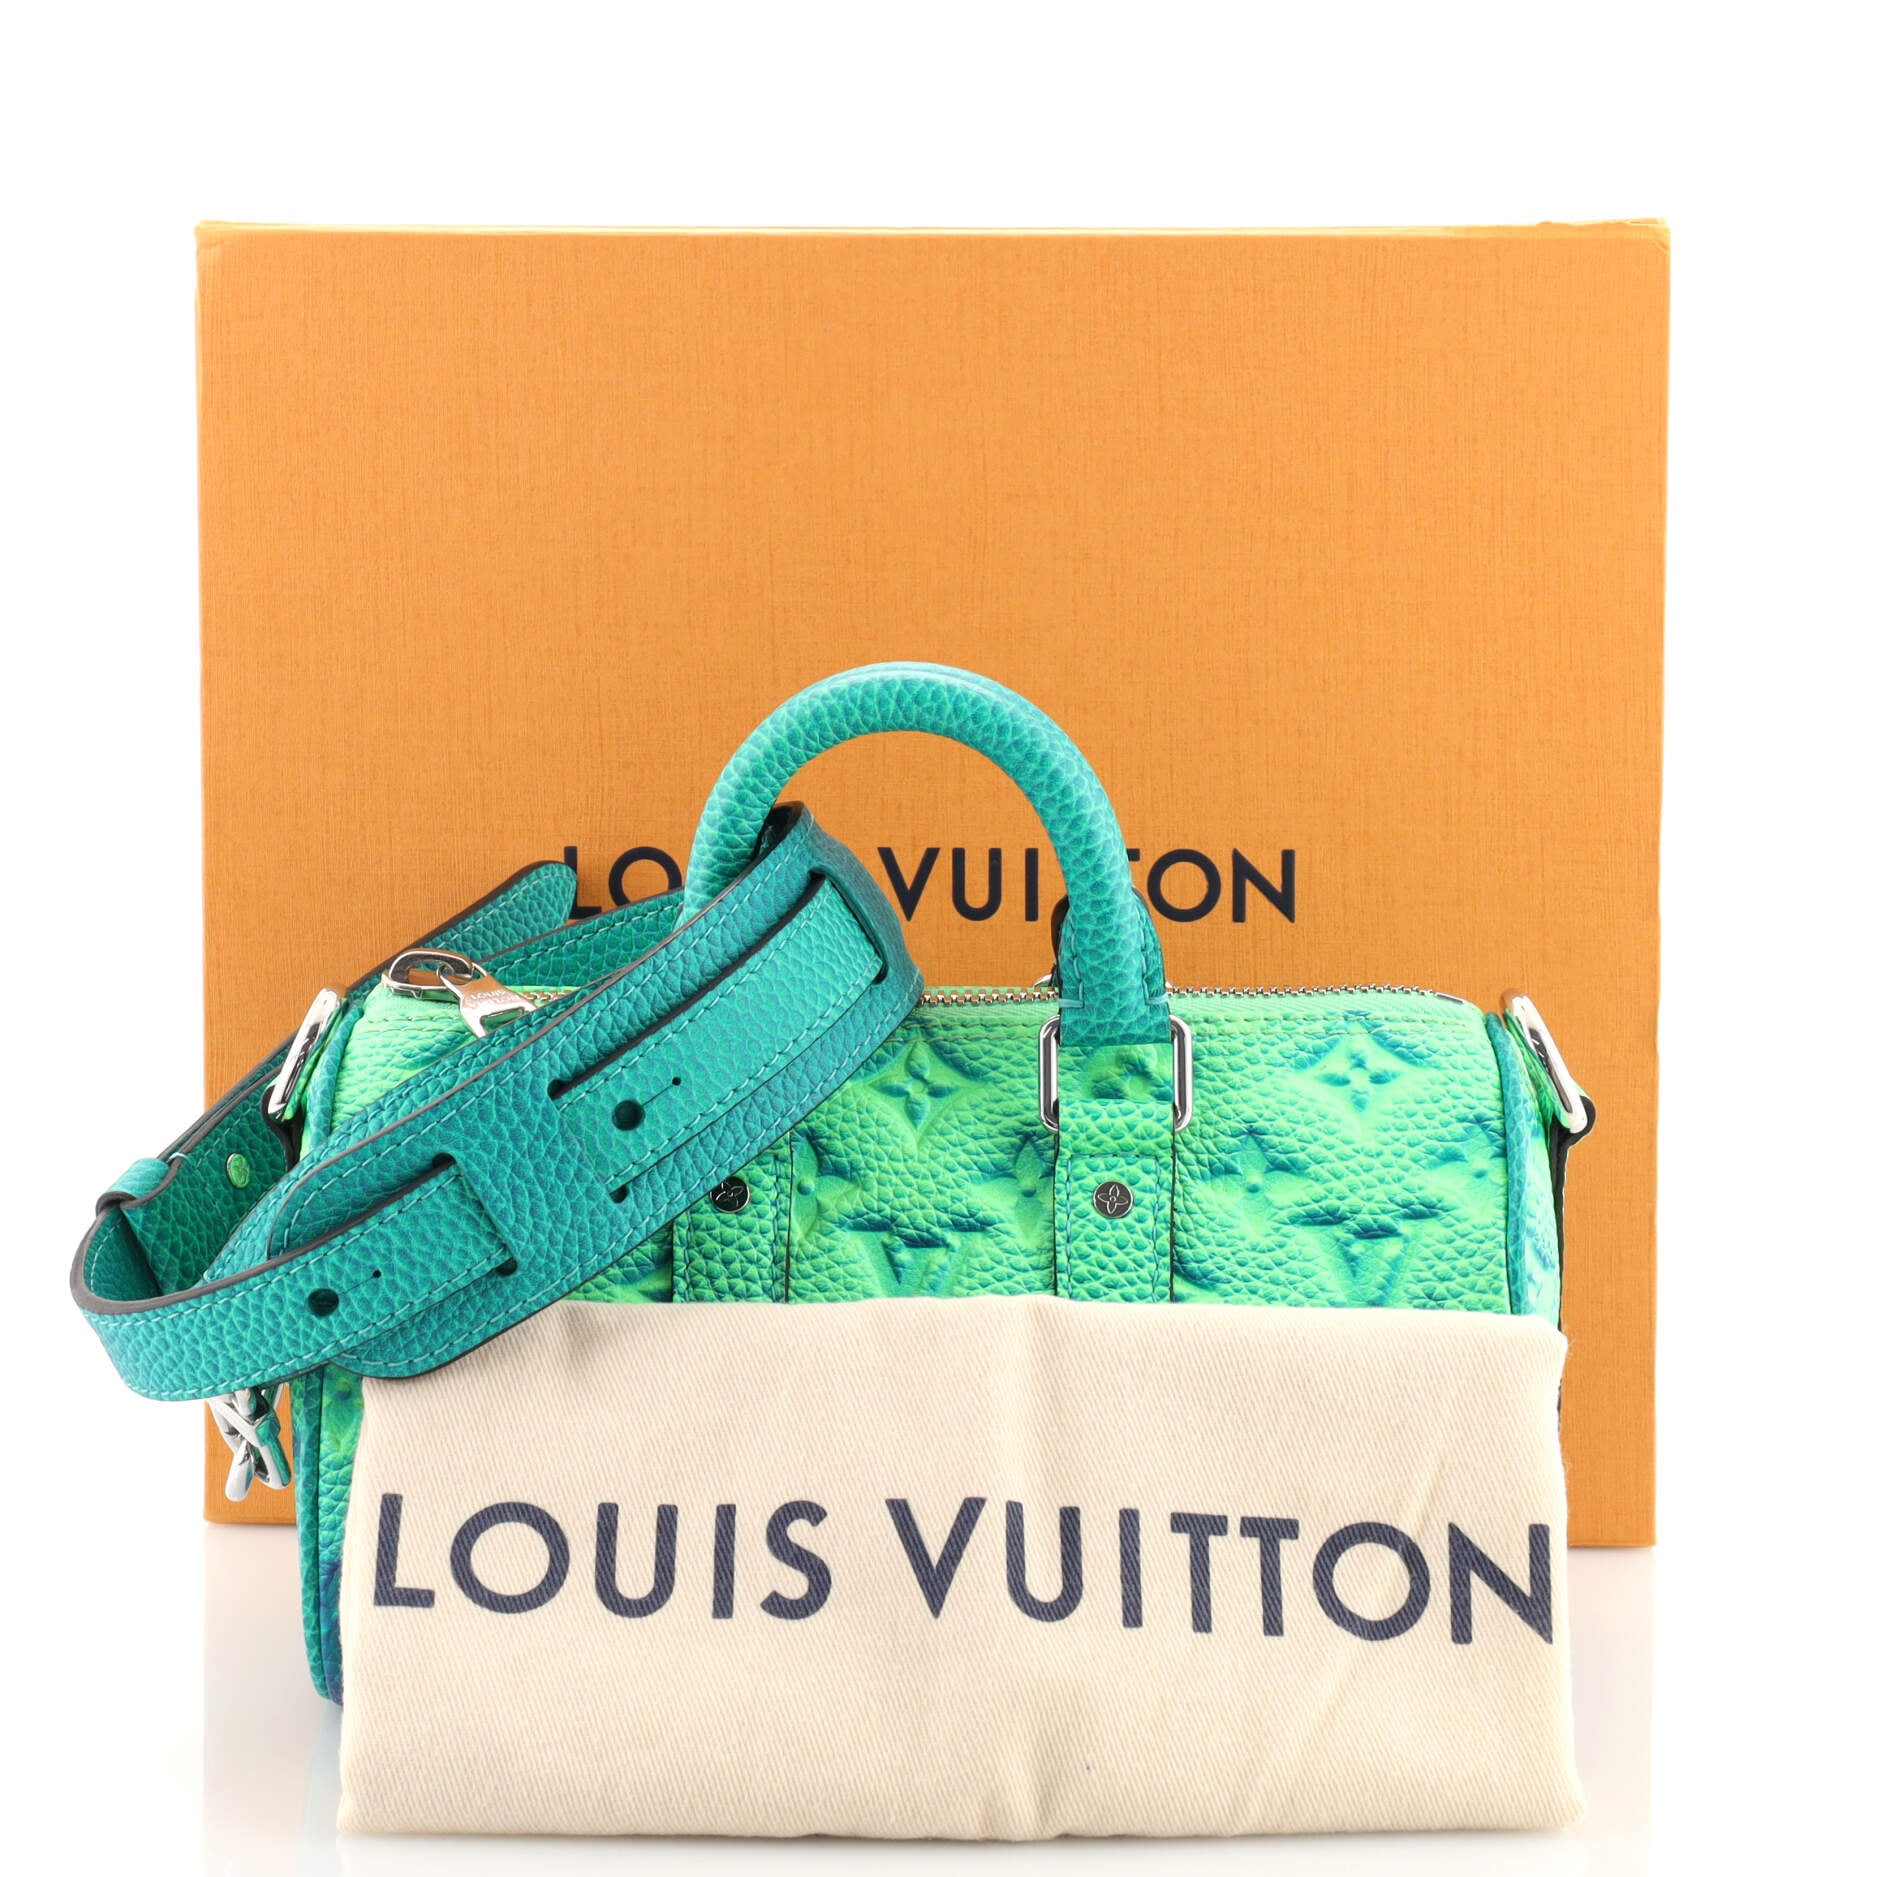 Louis Vuitton Keepall Bandouliere Bag Limited Edition Illusion